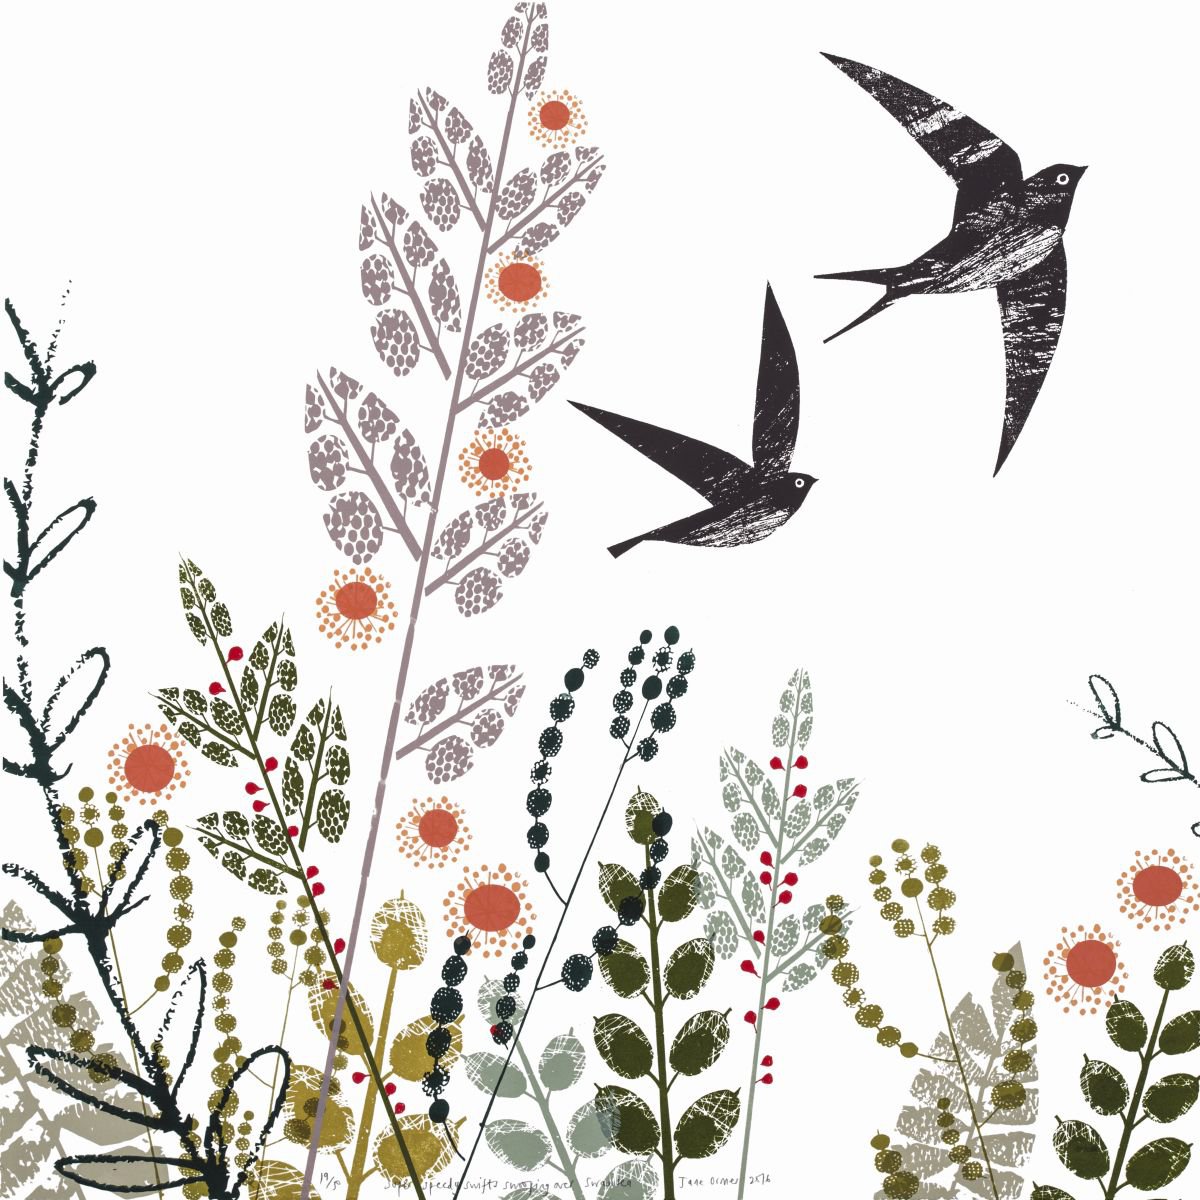 Swallows swooping swiftly over Swansea by Jane Ormes